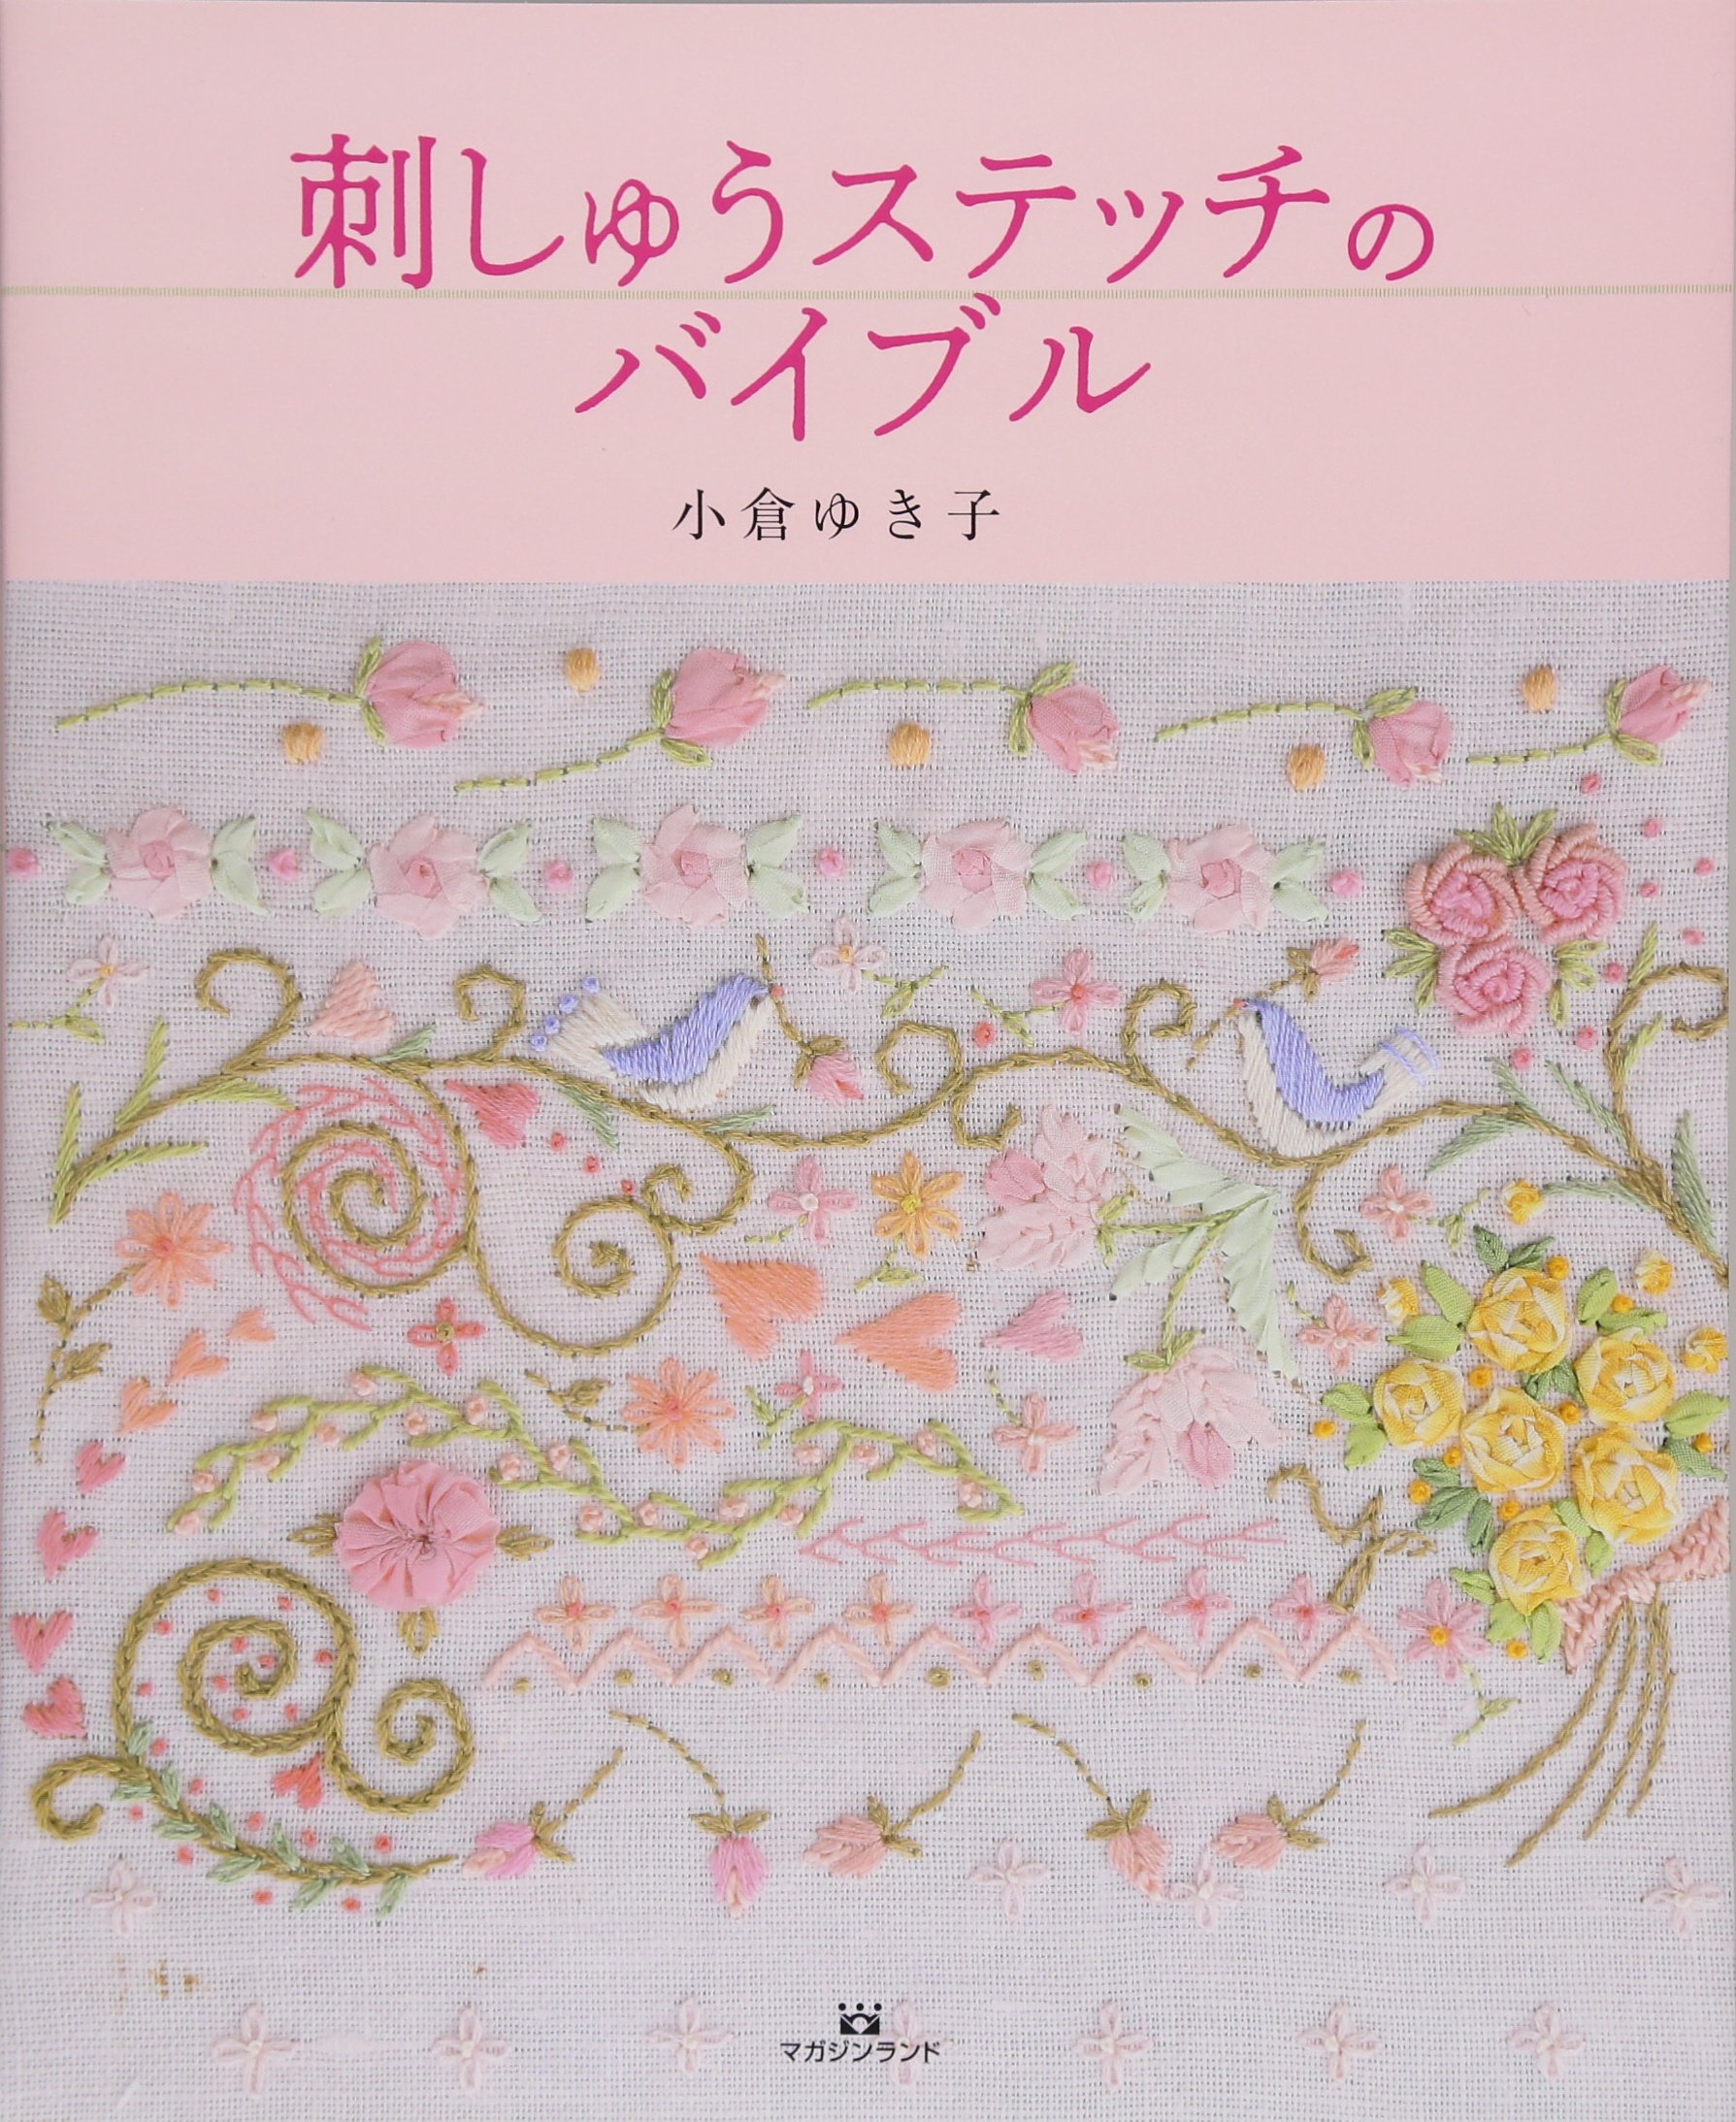 Bible of embroidery stitch